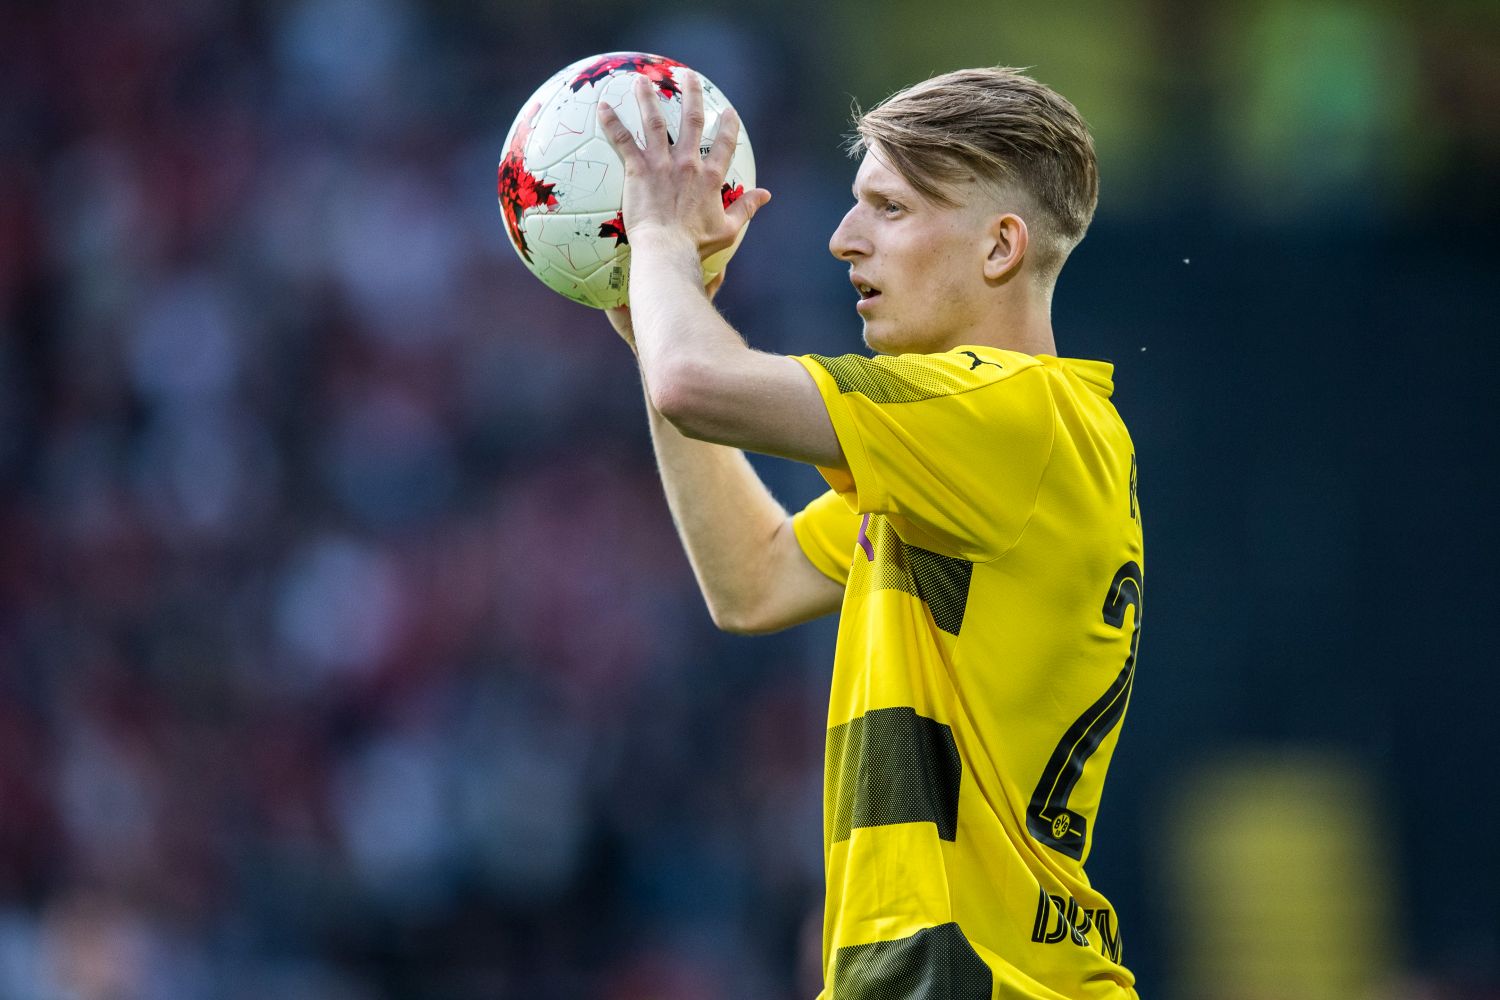 DORTMUND, GERMANY - MAY 22: Jan-Niklas Beste of Dortmund holds the ball during the U19 German Championship Final between Borussia Dortmund and FC Bayern Muenchen on May 22, 2017 in Dortmund, Germany. (Photo by Lukas Schulze/Bongarts/Getty Images)